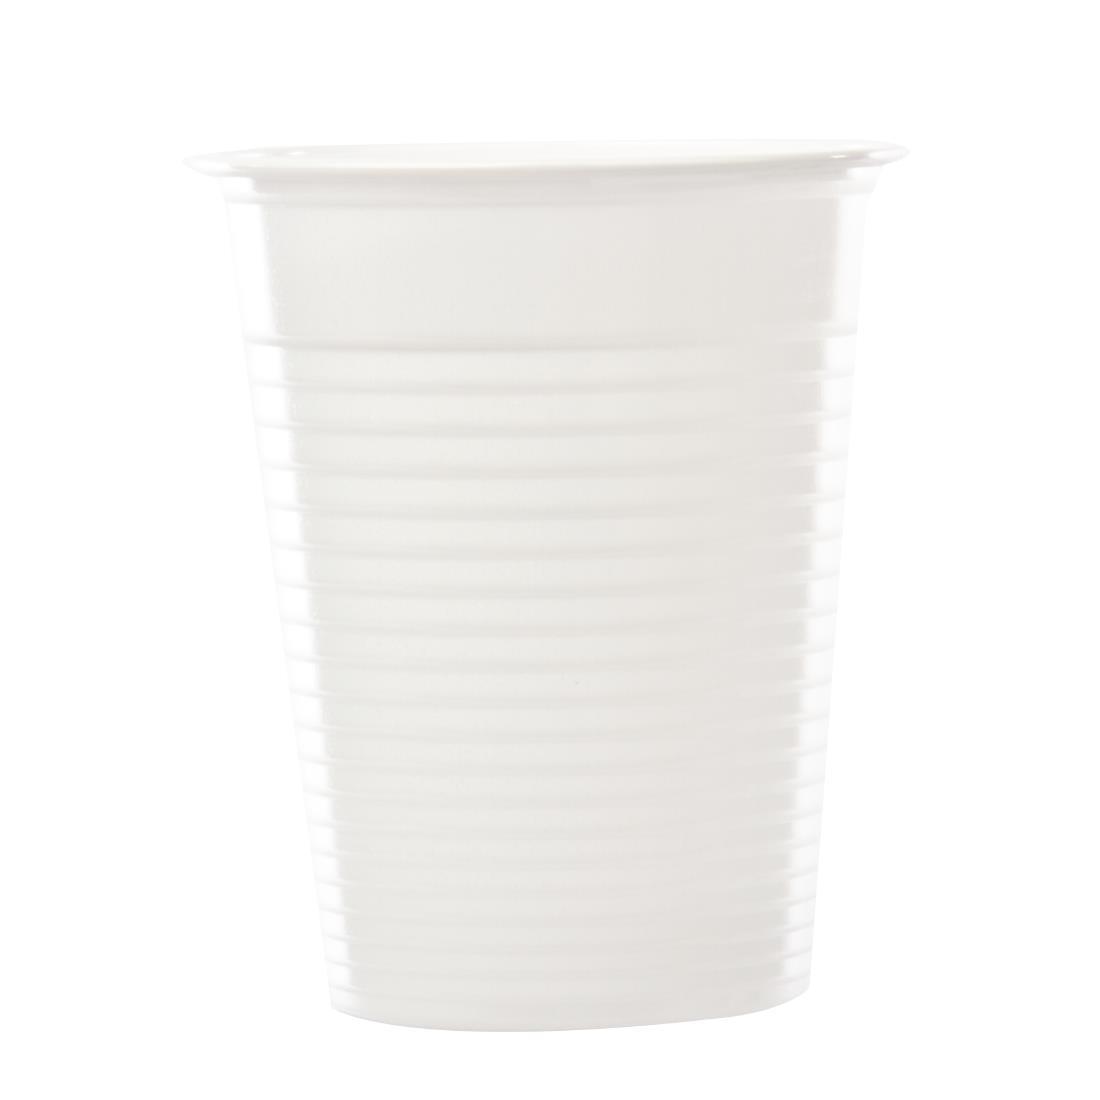 Water Cooler Cups White 200ml / 7oz (Pack of 2000) - GF917  - 1